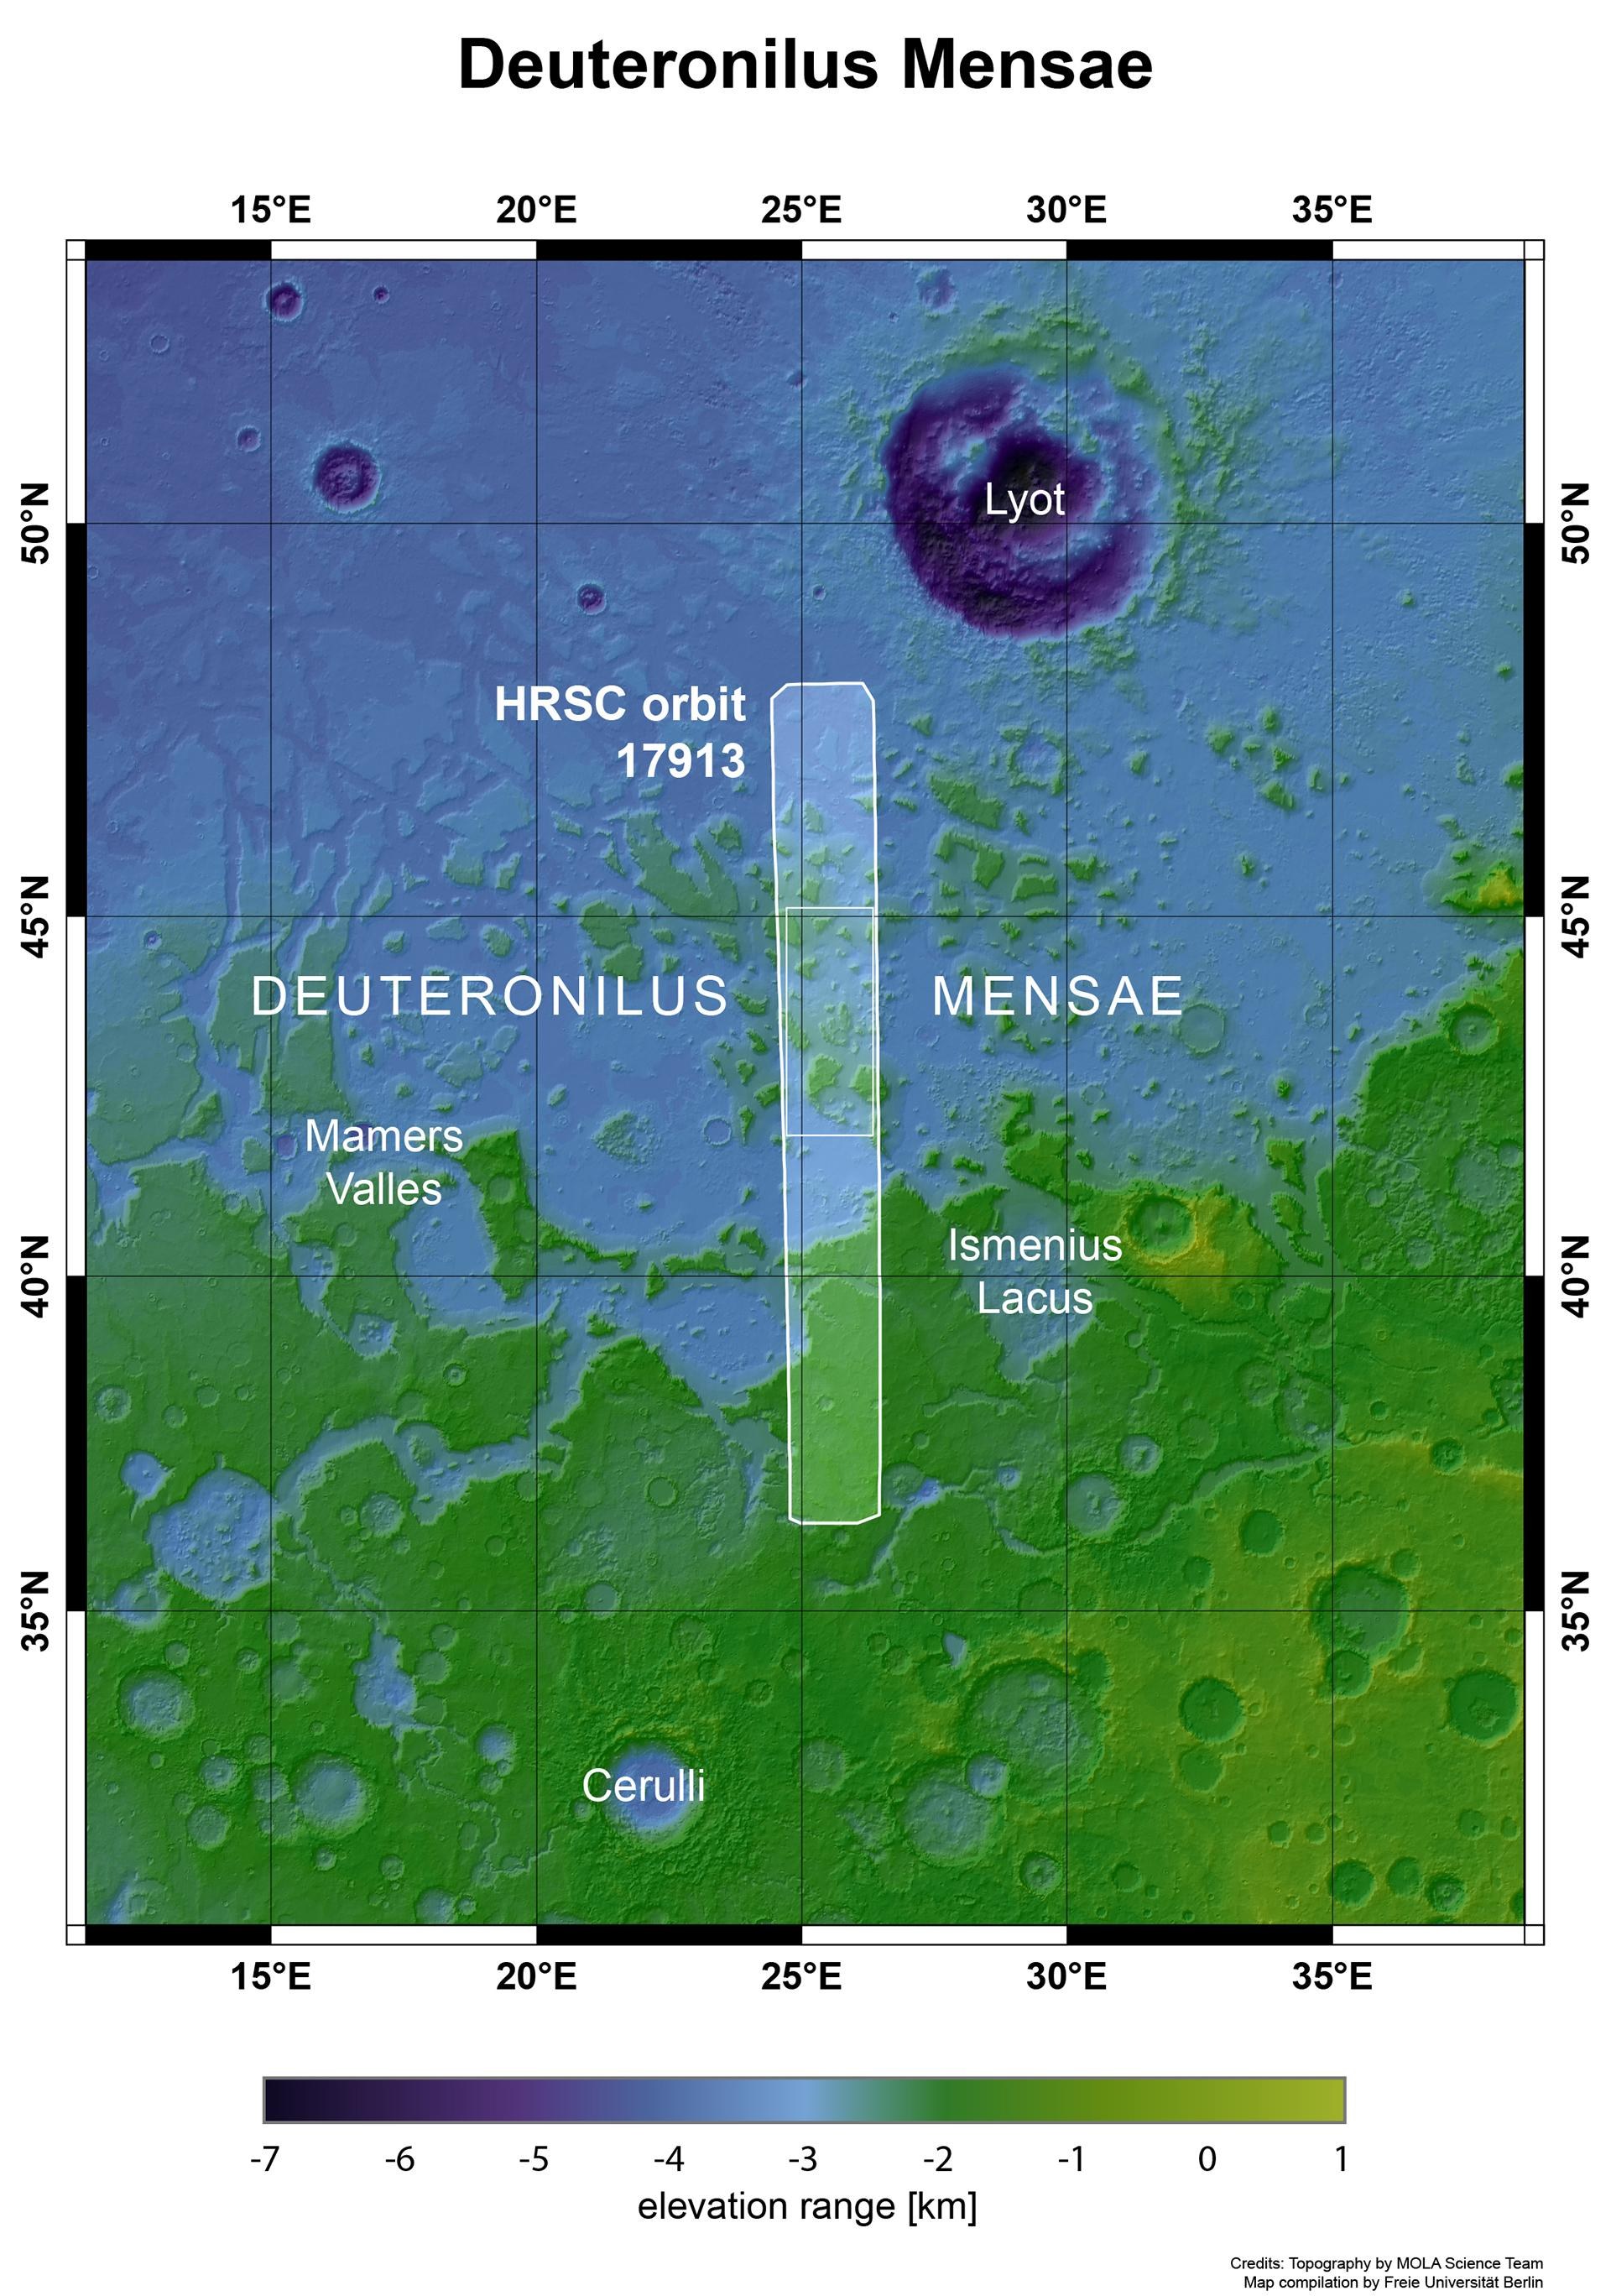 Deuteronilus Mensae, Mars – transition zone between the highlands and lowlands